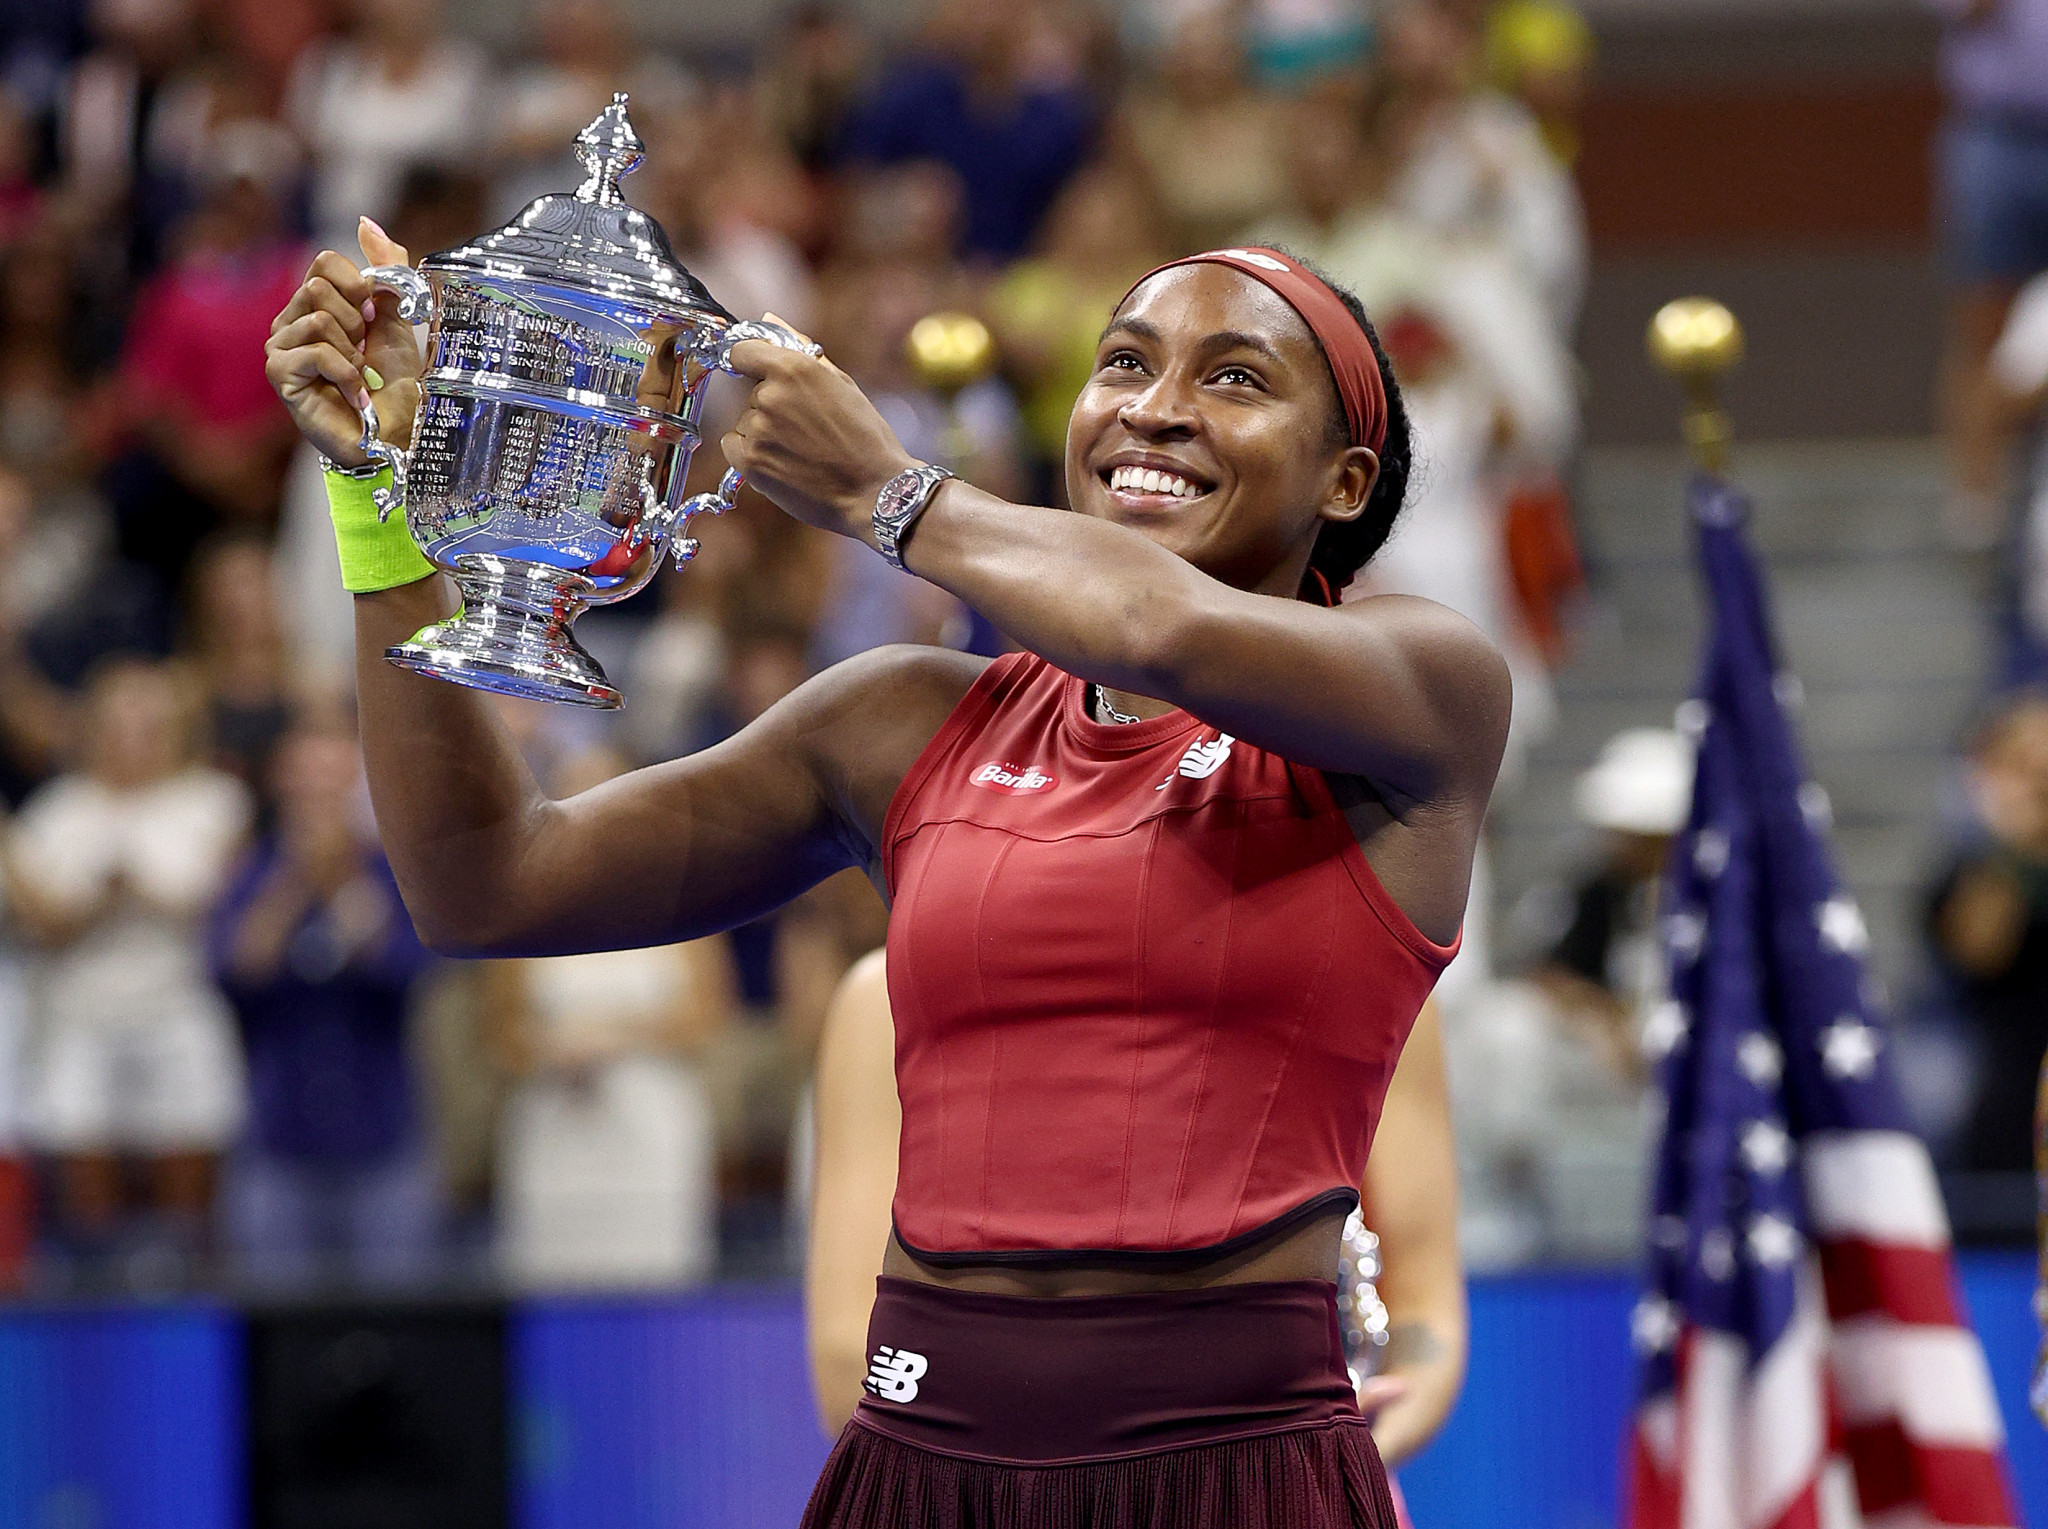 Home favourite Gauff fights back for first Grand Slam title at US Open